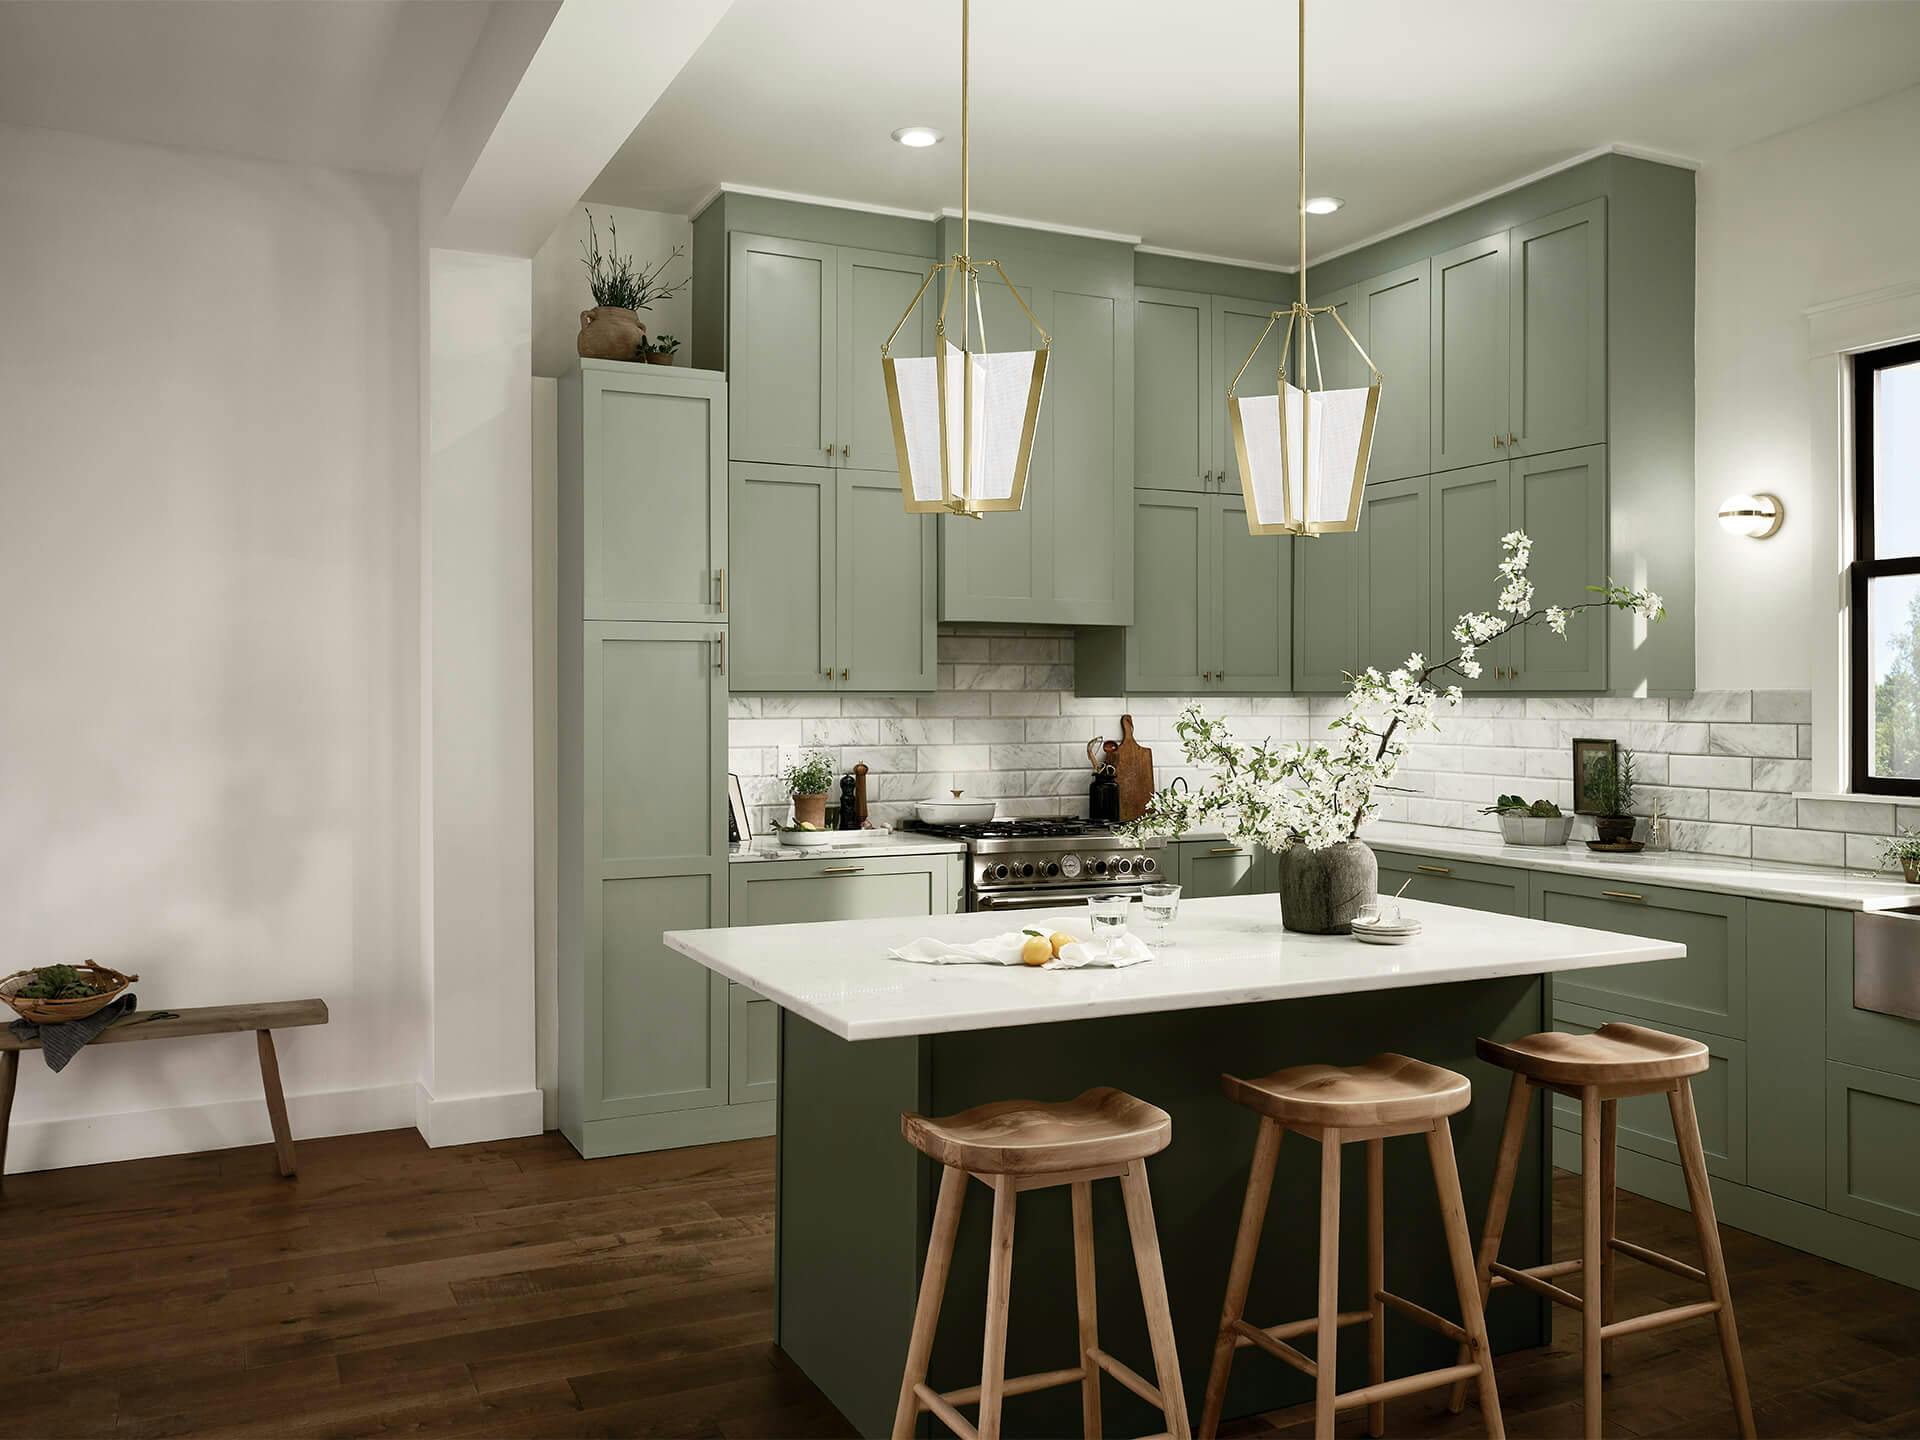 A kitchen with 2 Calters pendants above a white marble kitchen island in the daytime with the lights turned on